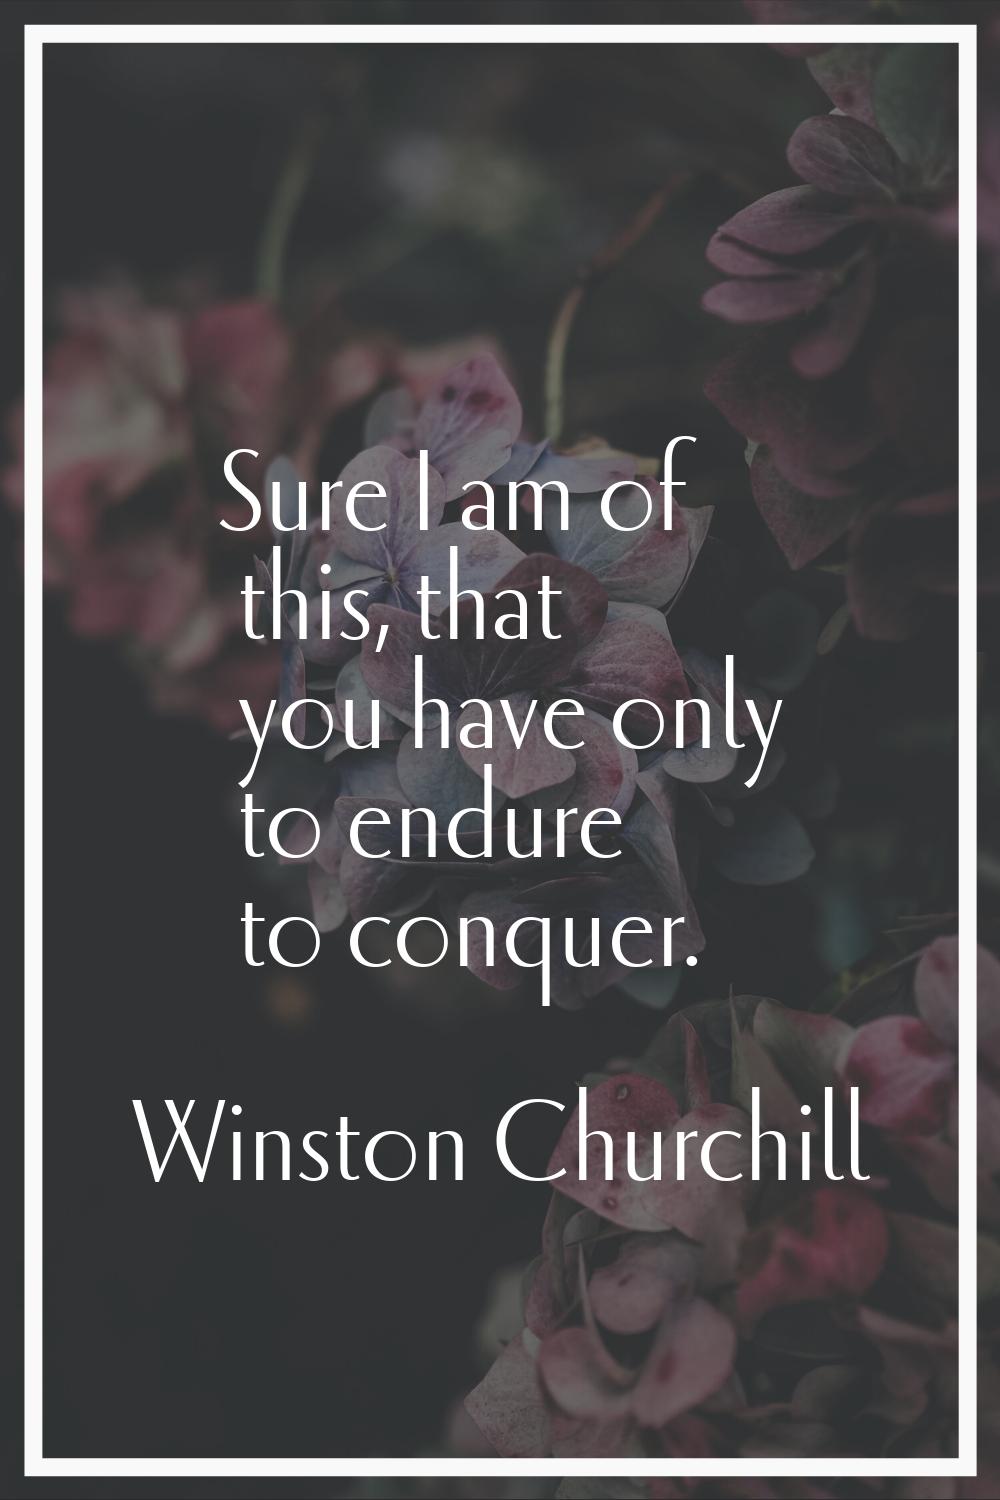 Sure I am of this, that you have only to endure to conquer.